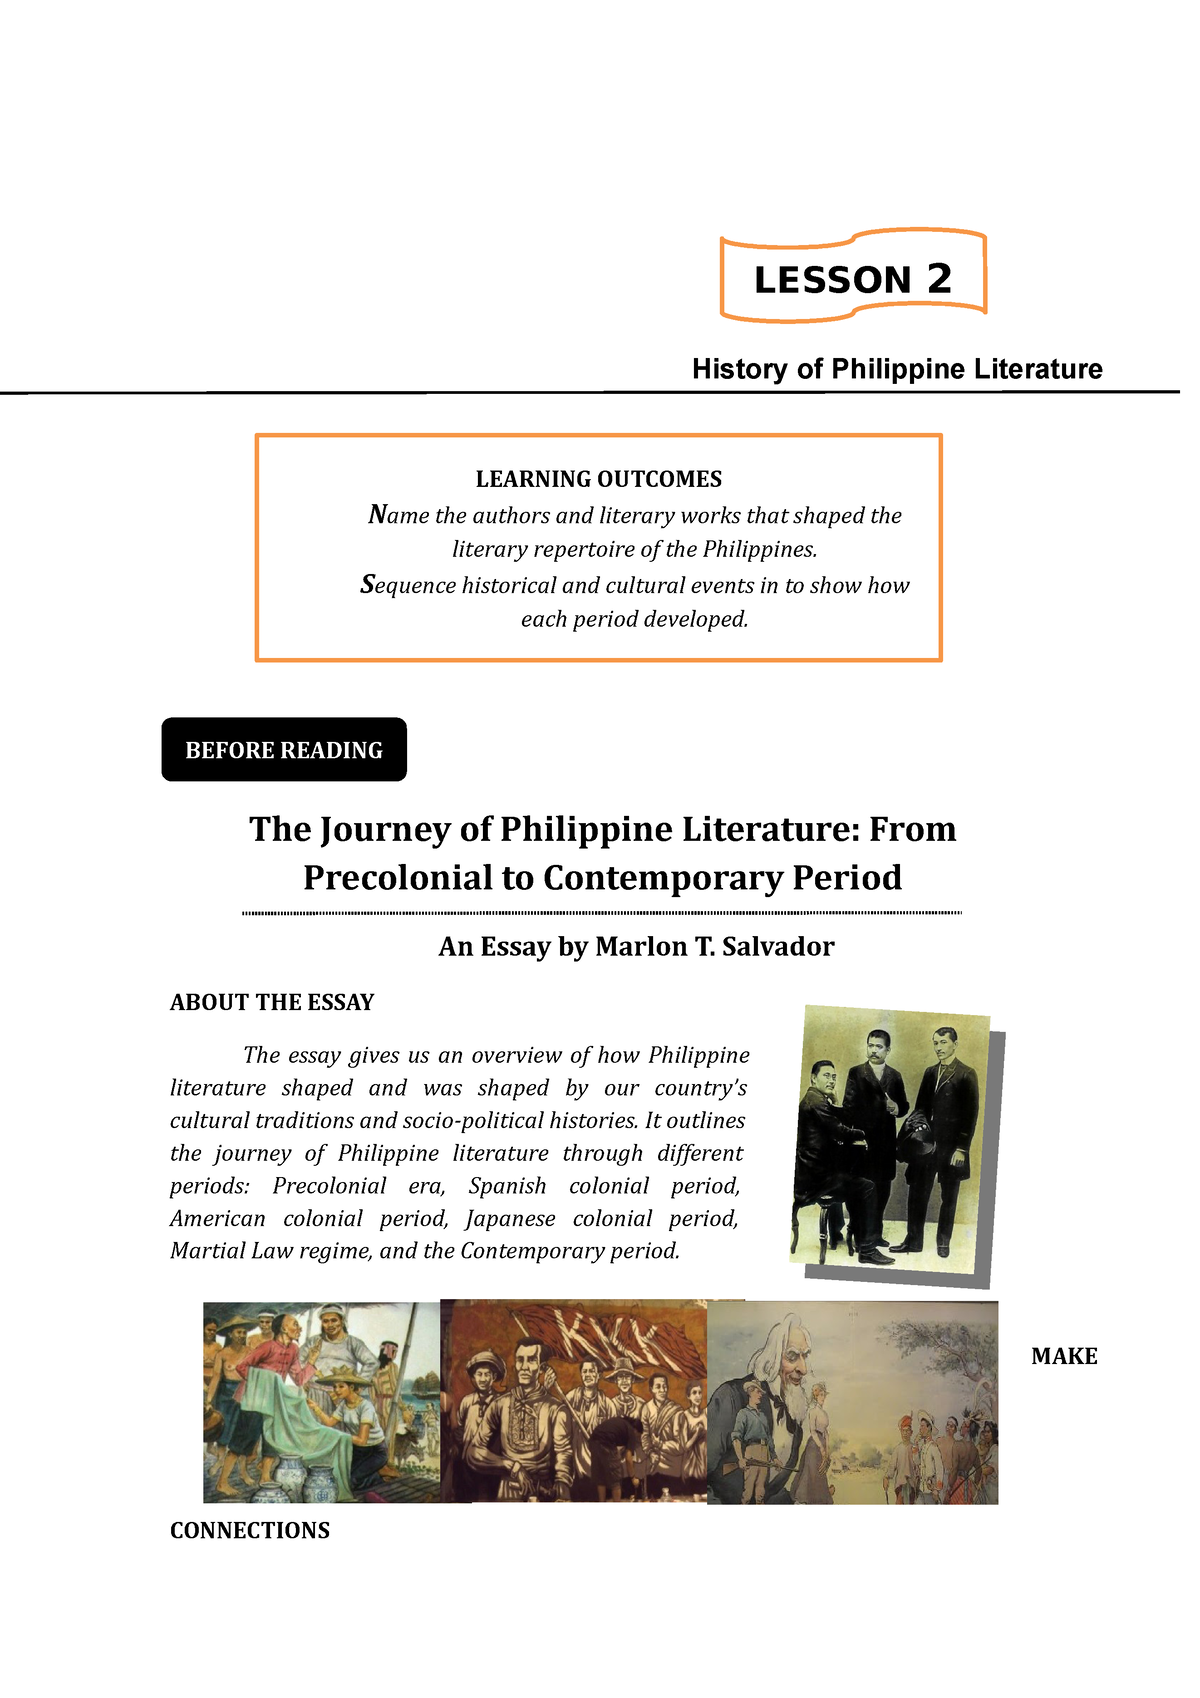 essay about philippine literary history